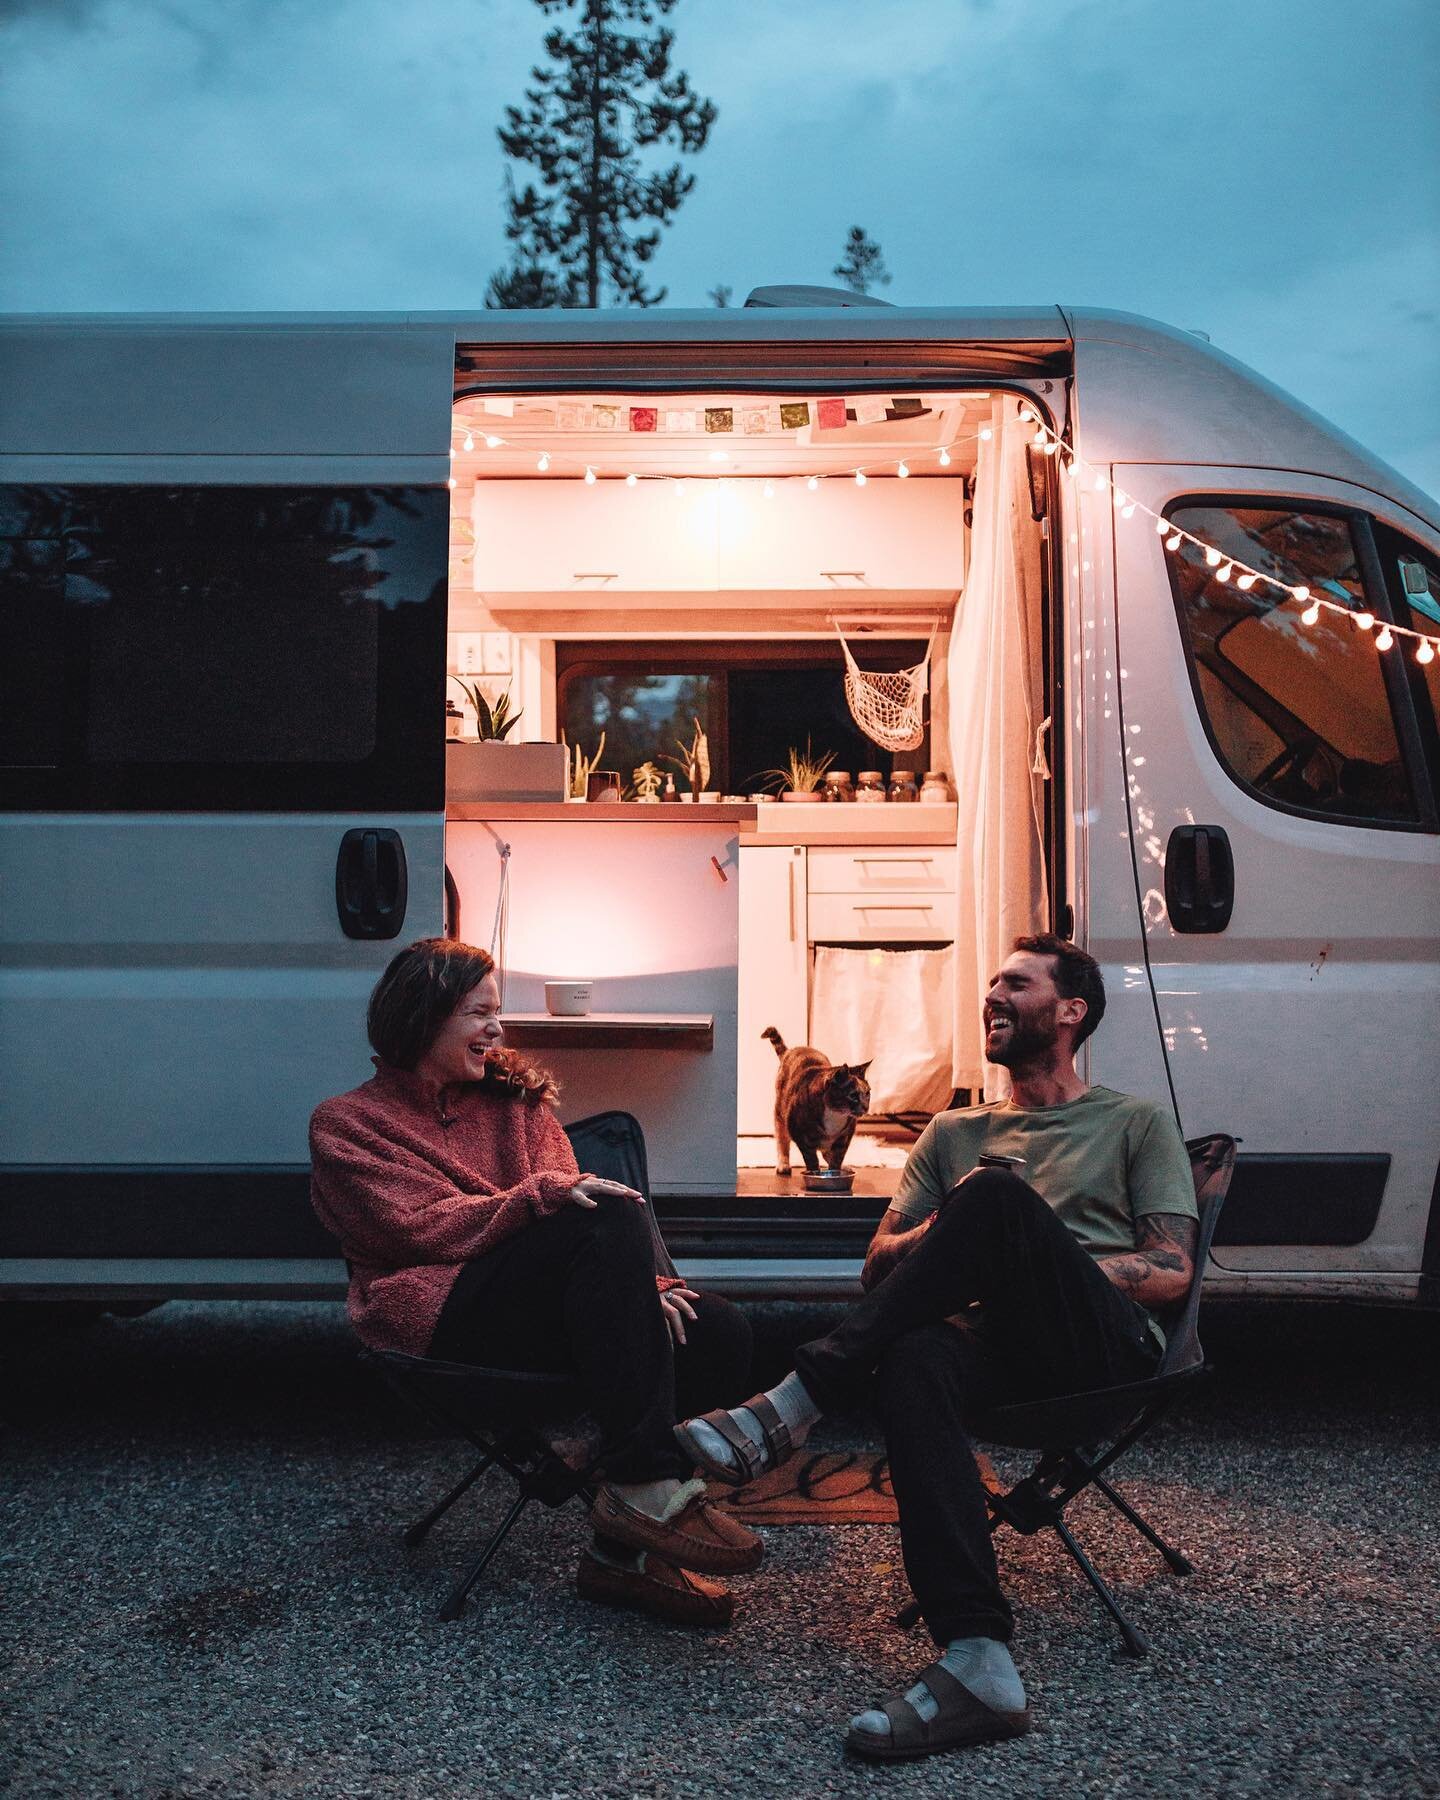 We&rsquo;ve been prepping the van the past few days to head down south for a big job that we&rsquo;re super excited about!! After a long winter, we&rsquo;re so stoked to be getting back on the road!!

If you have any recommendations of cool places in